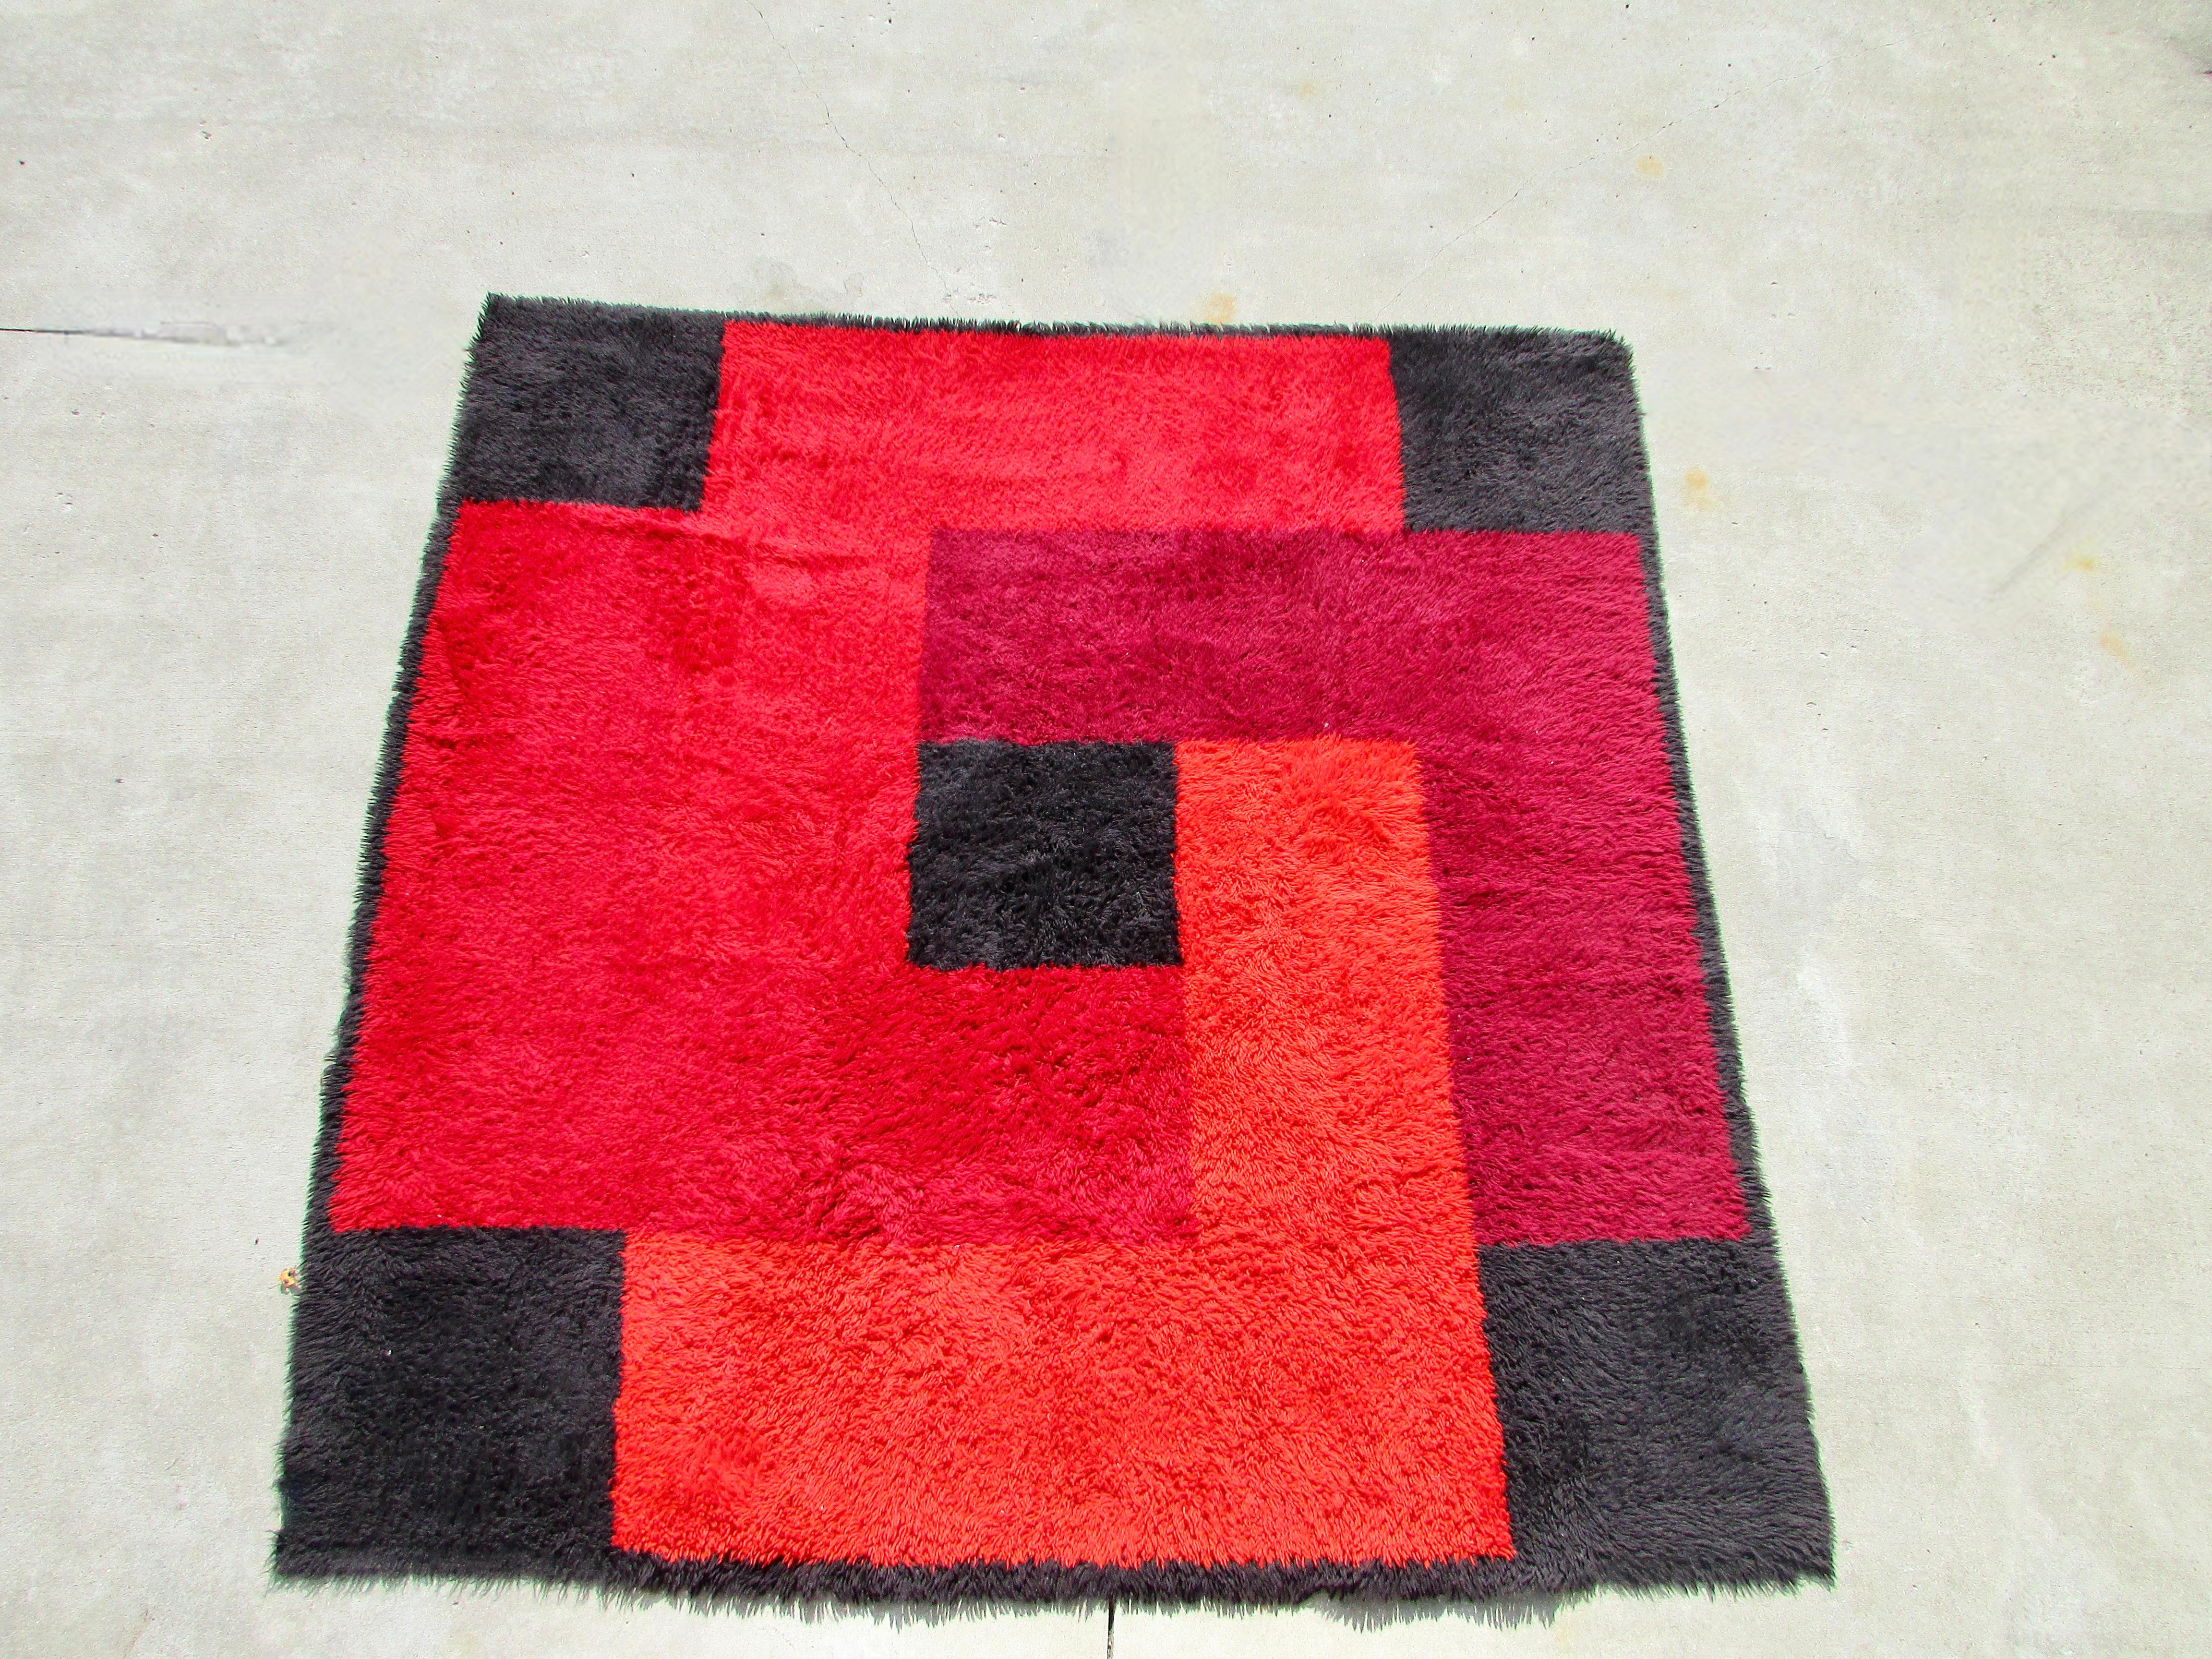 Deep dense 100% wool shag pile square rya rug produced in Denmark circa 1965 by Dania Taepper in a geometric collage of contrasting reds and black. Measures: 90